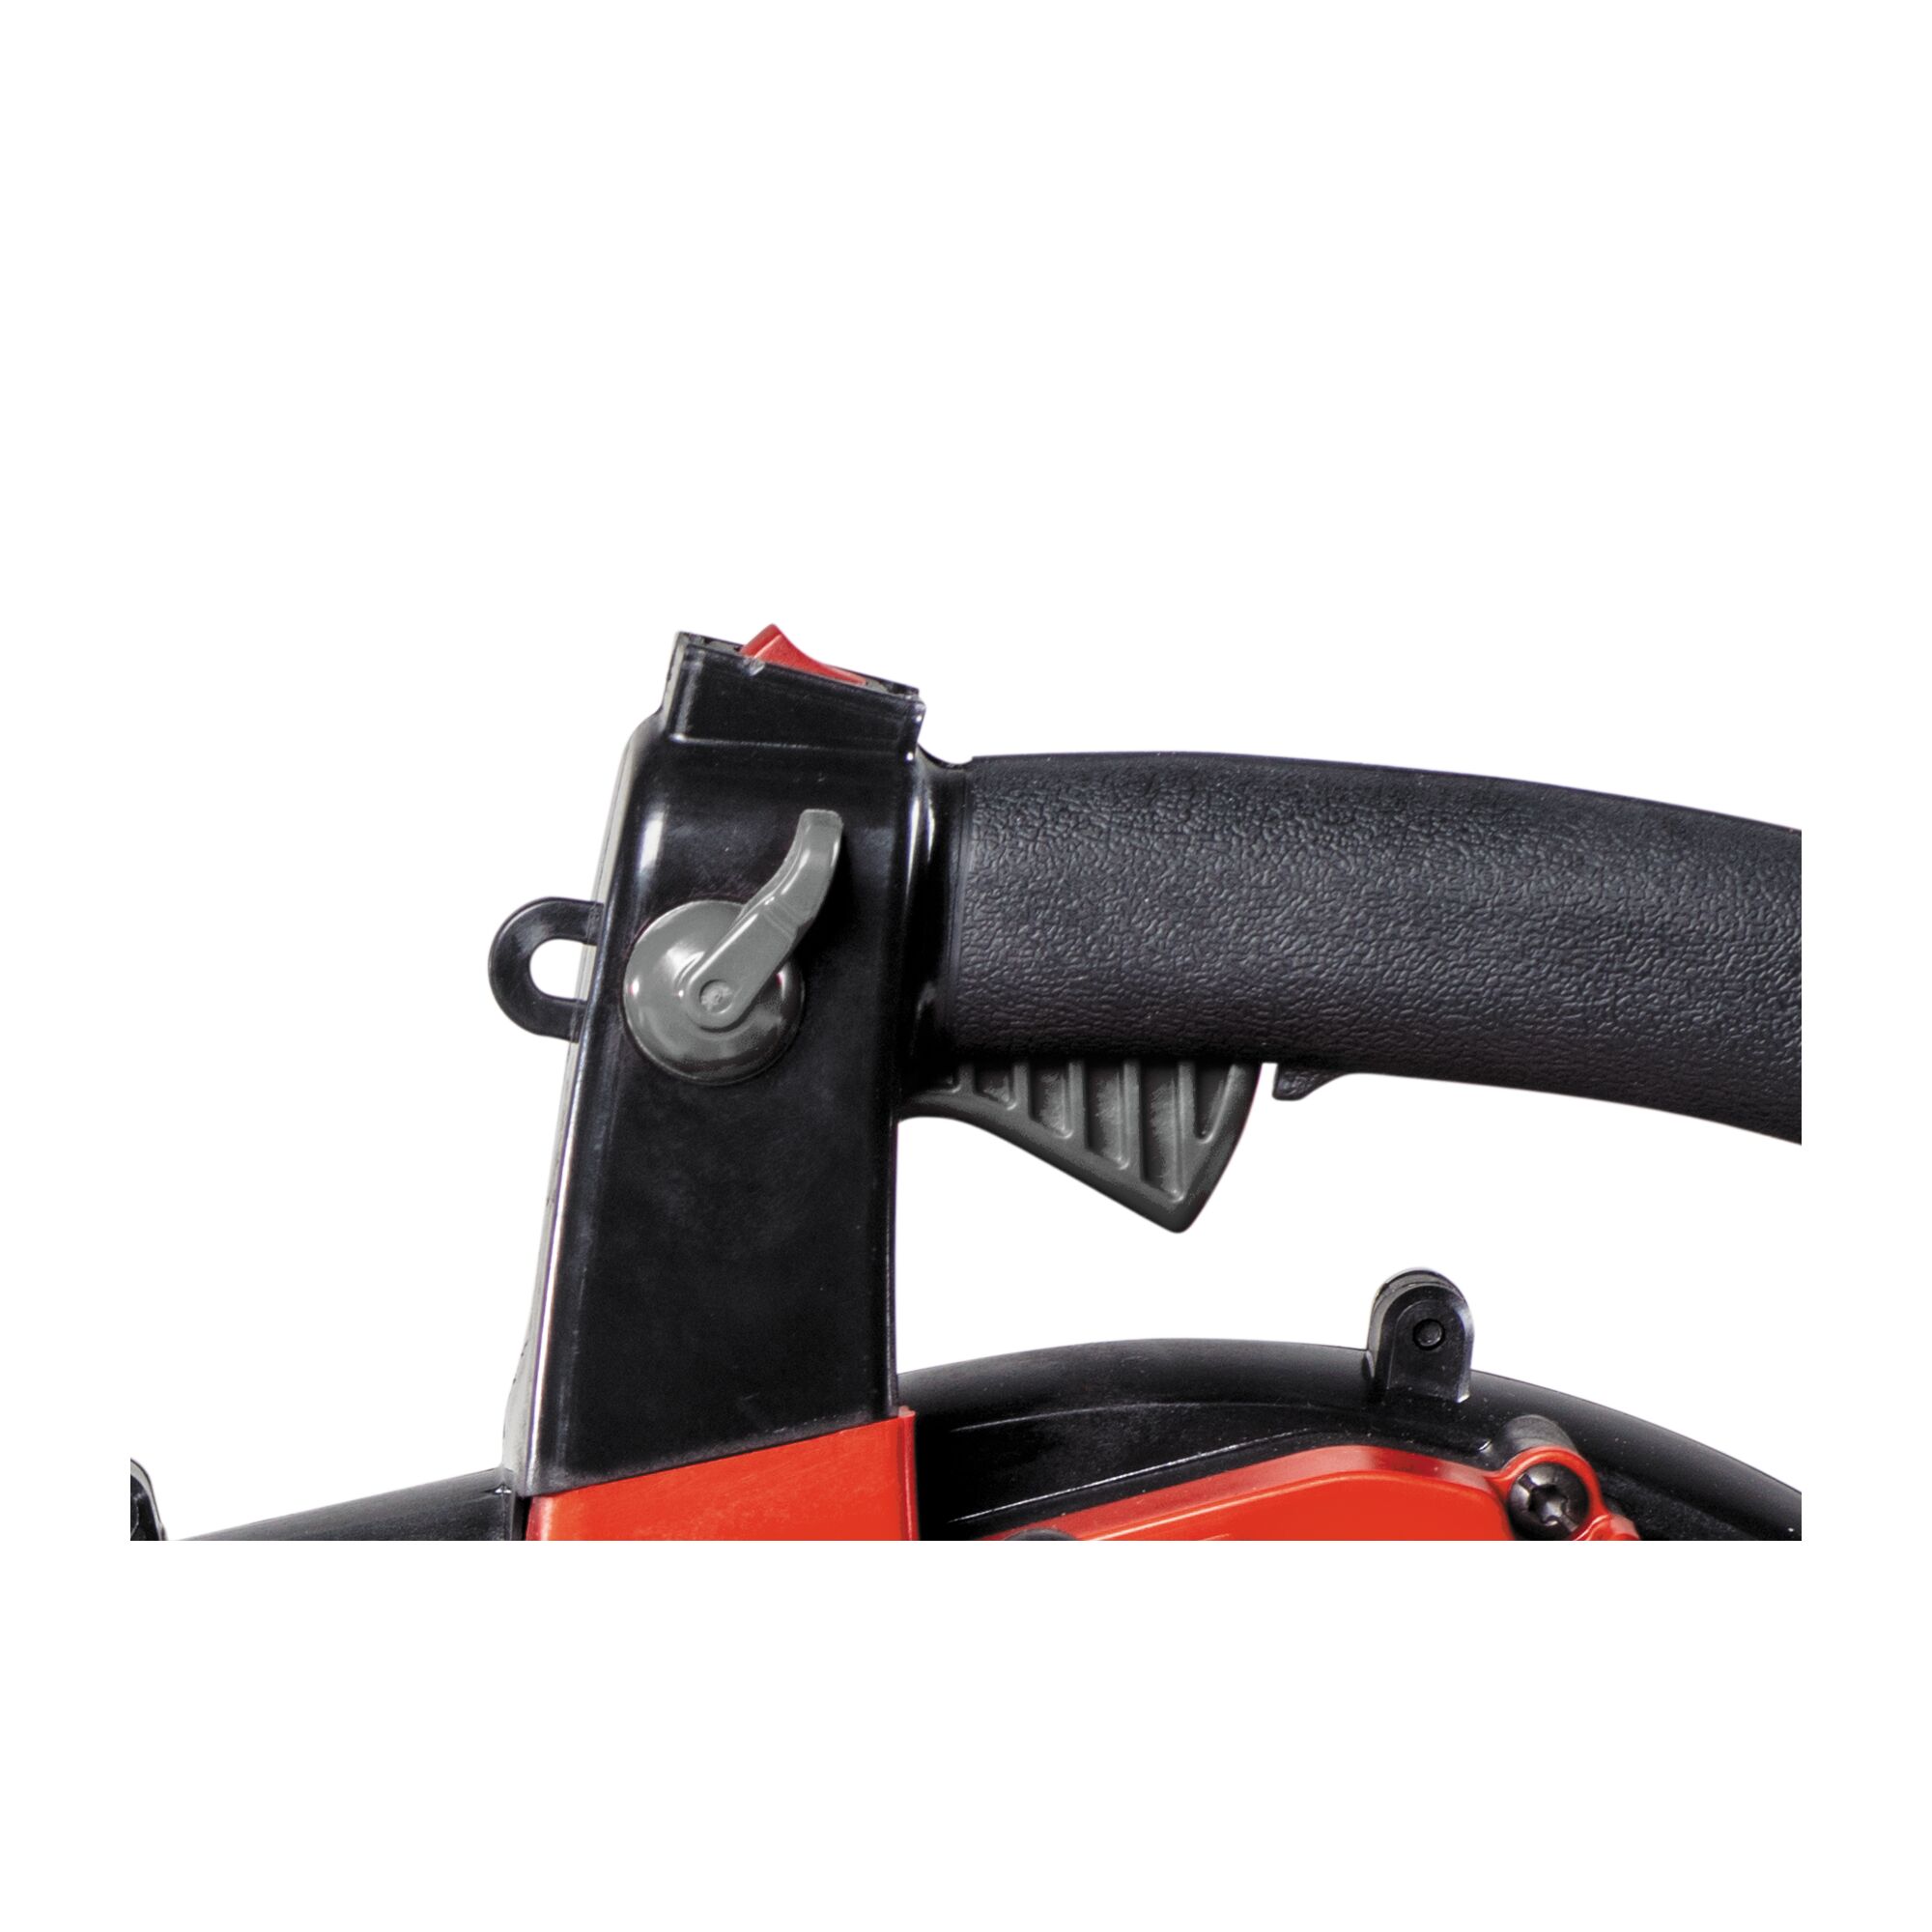 Easy pull start feature in B2500 27 CC 2 cycle gas leaf blower.